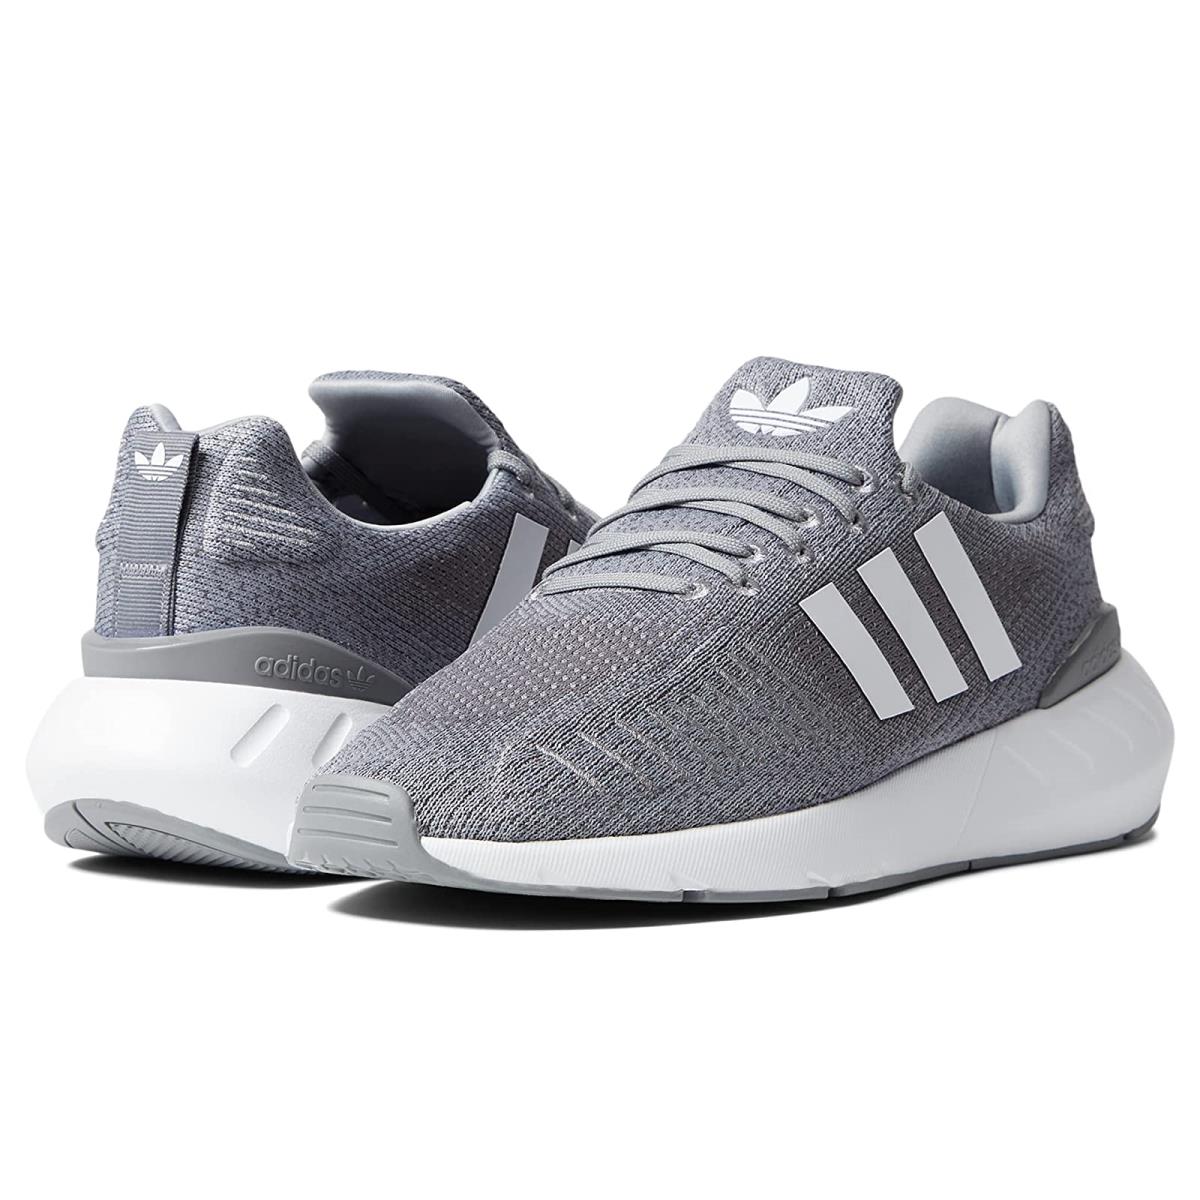 Man`s Sneakers Athletic Shoes Adidas Originals Swift Run 22 Grey/White/Grey